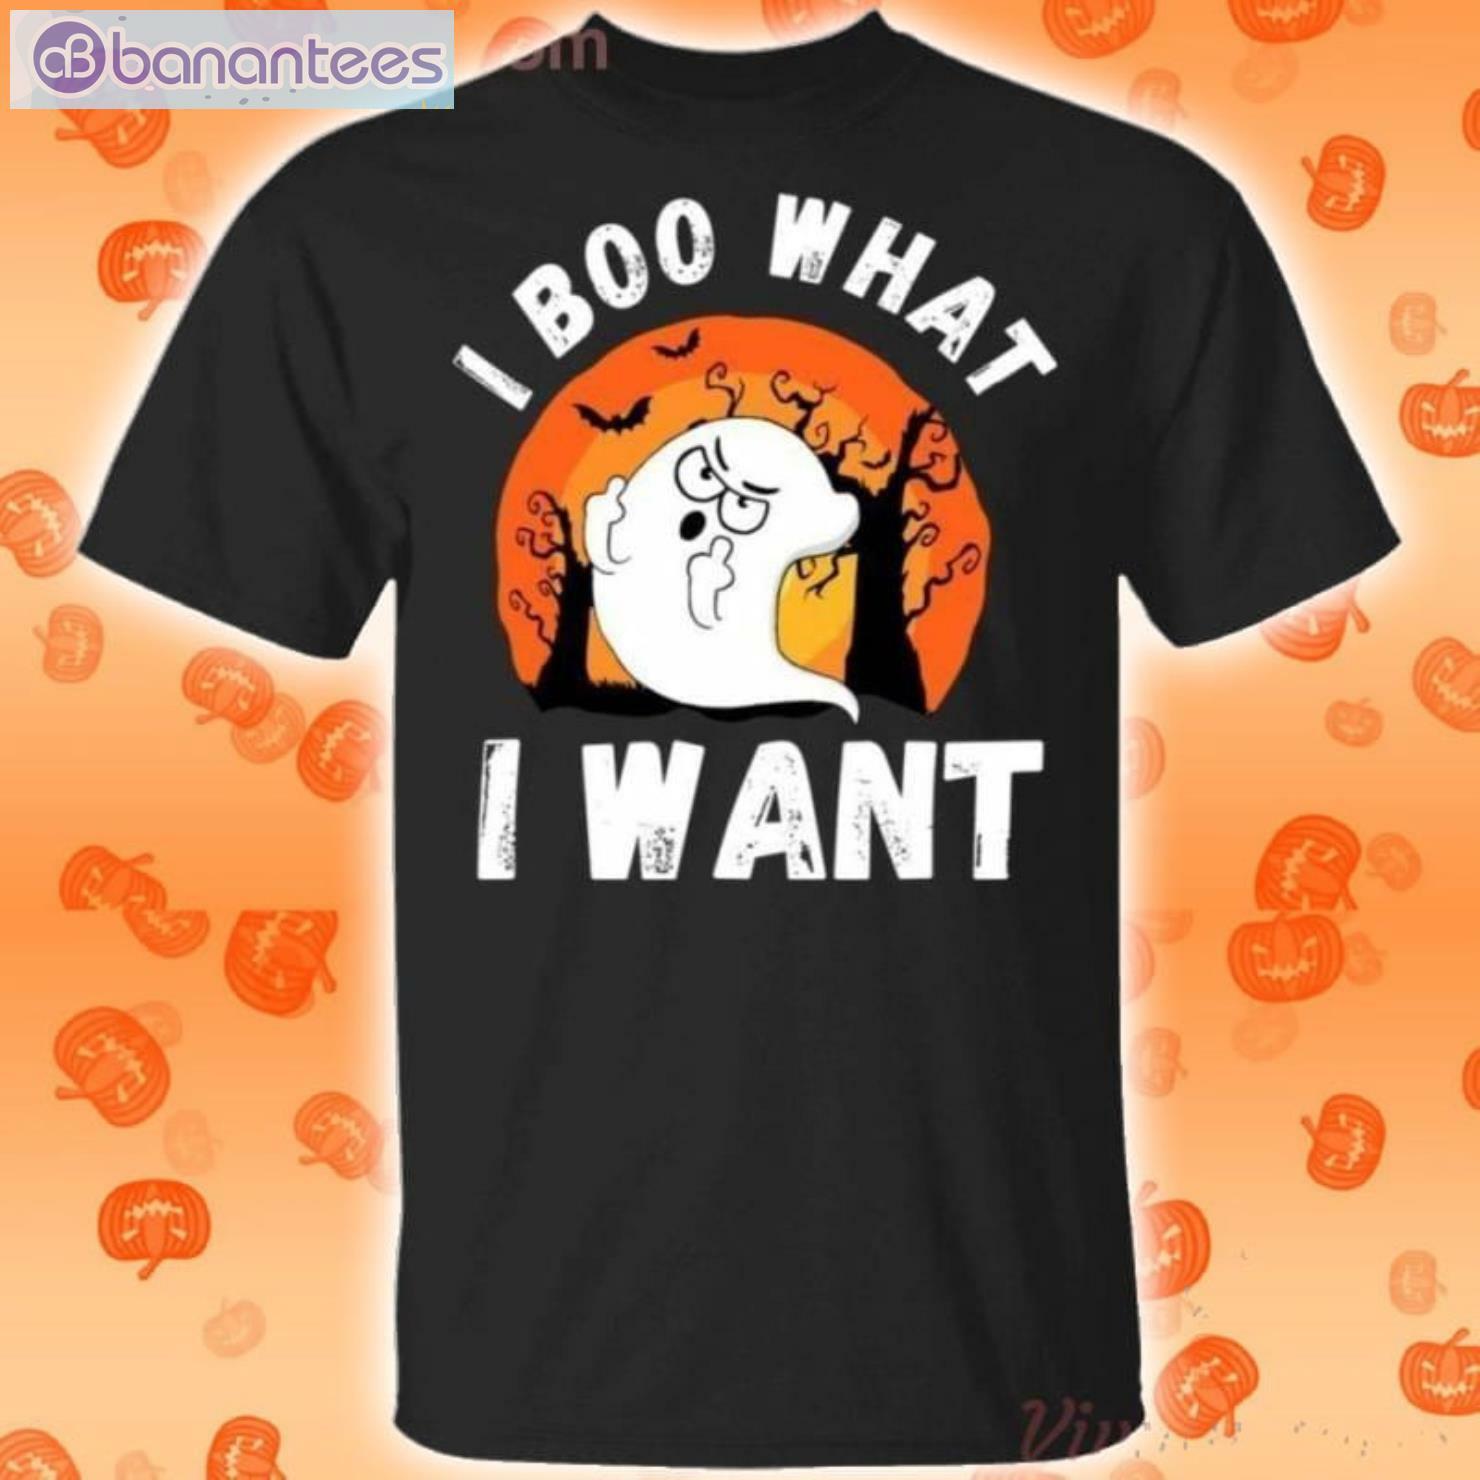 I Boo What I Want Funny Ghost Halloween T-Shirt Product Photo 1 Product photo 1